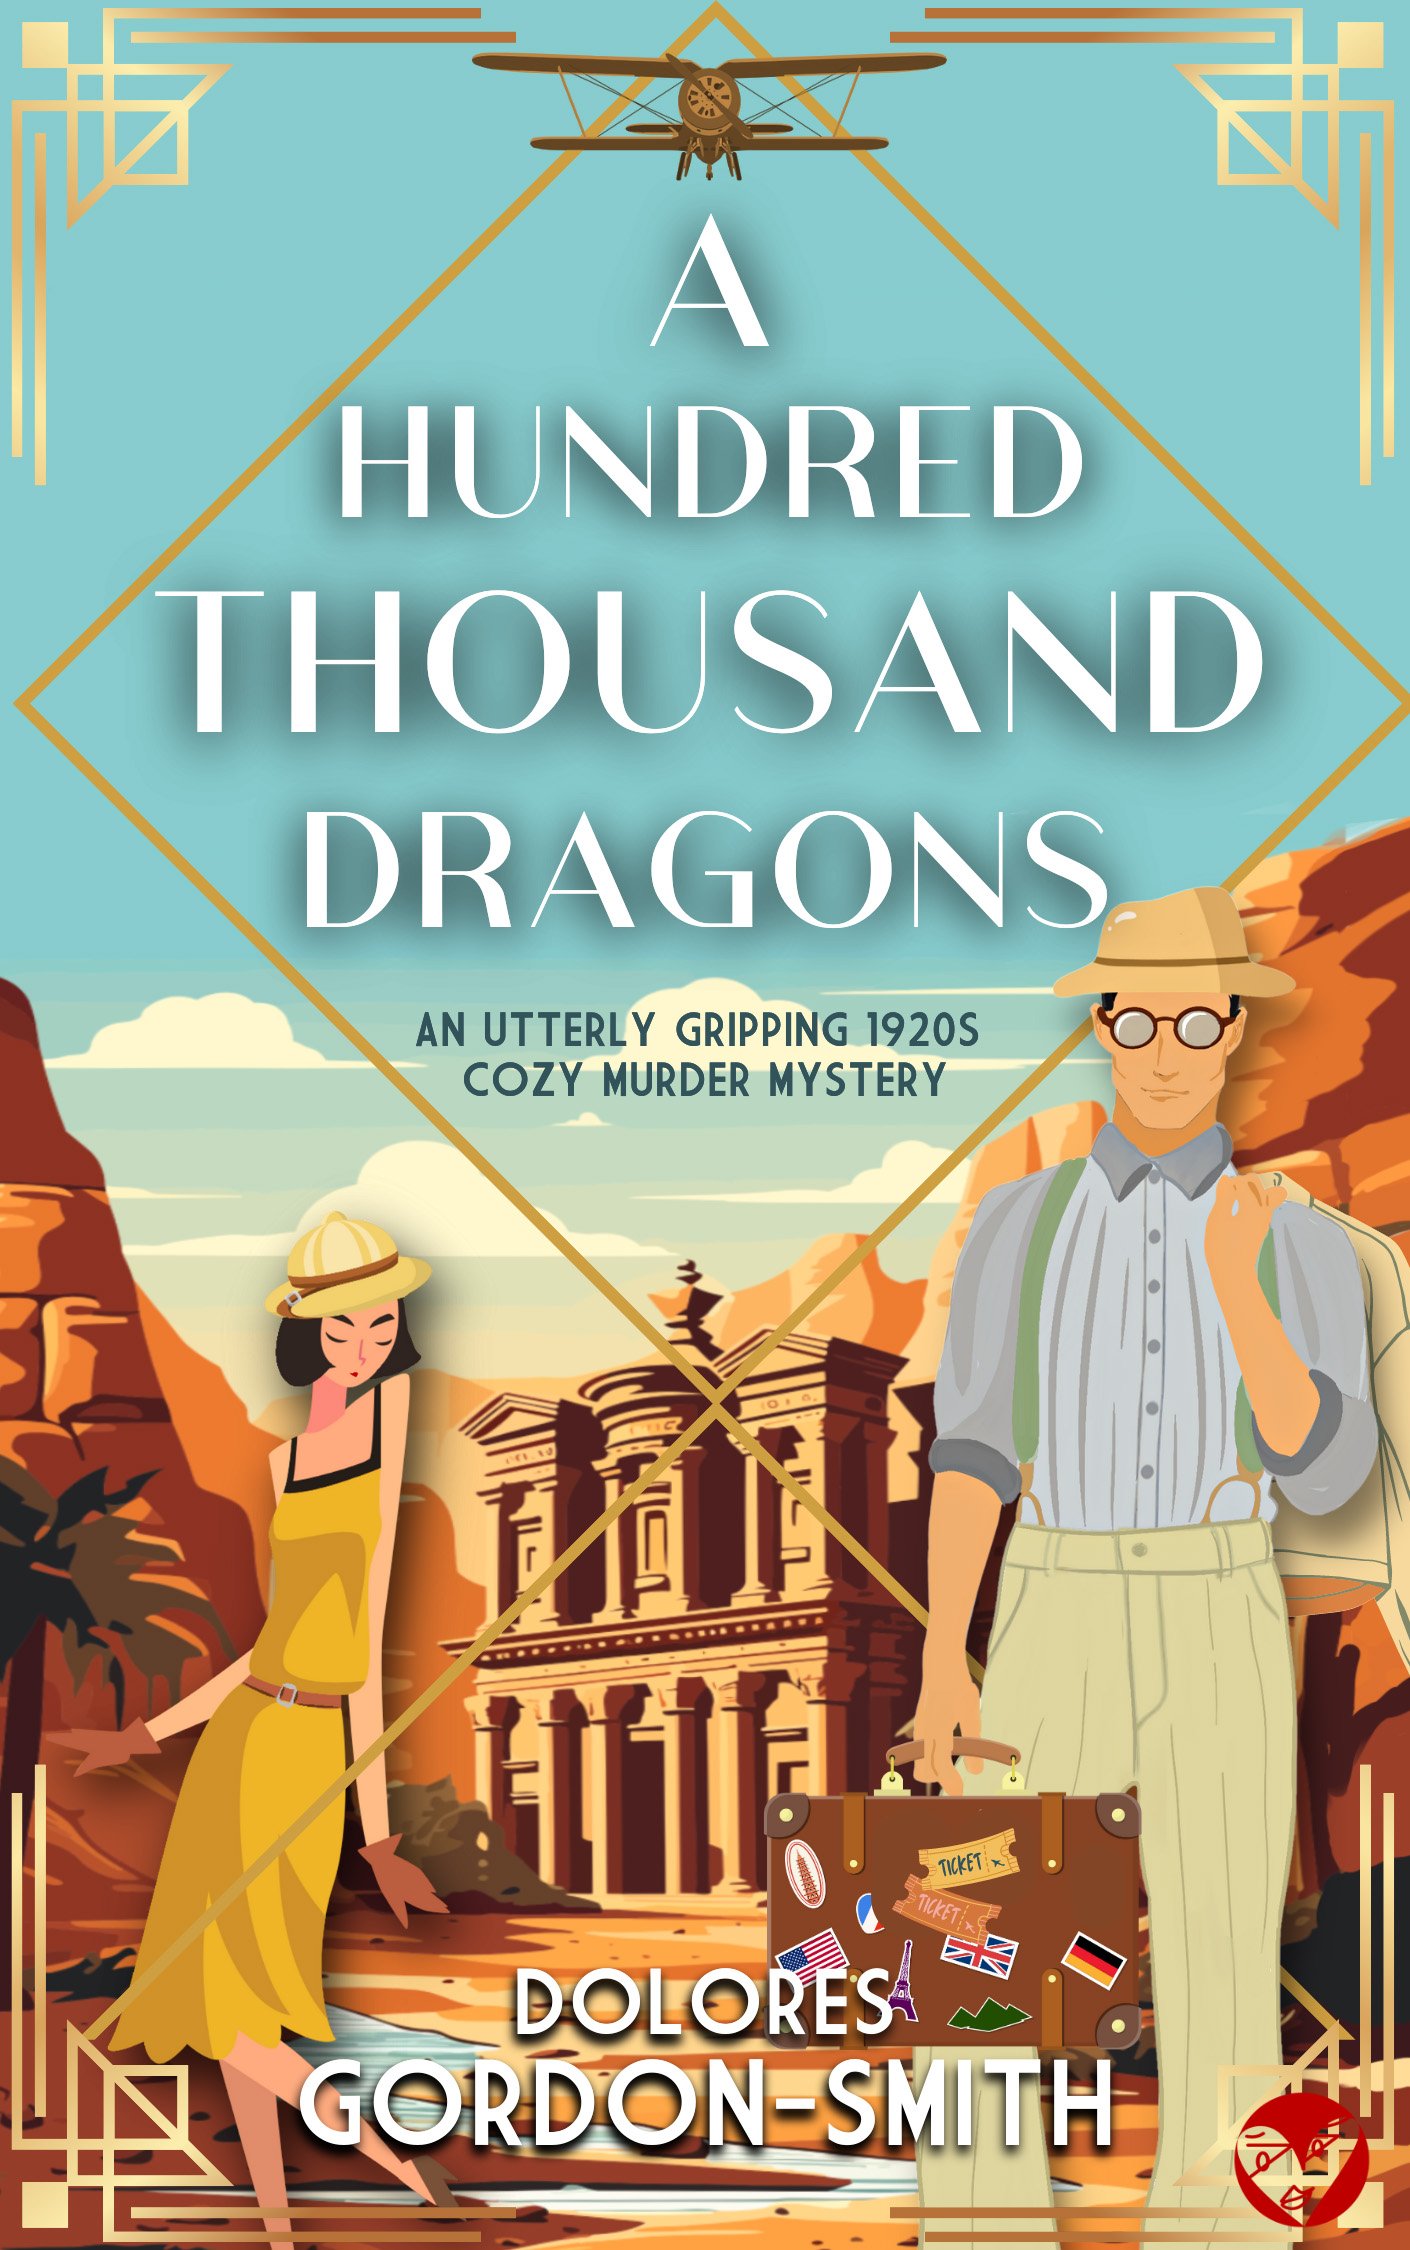 A HUNDRED THOUSAND DRAGONS cover publish.jpg